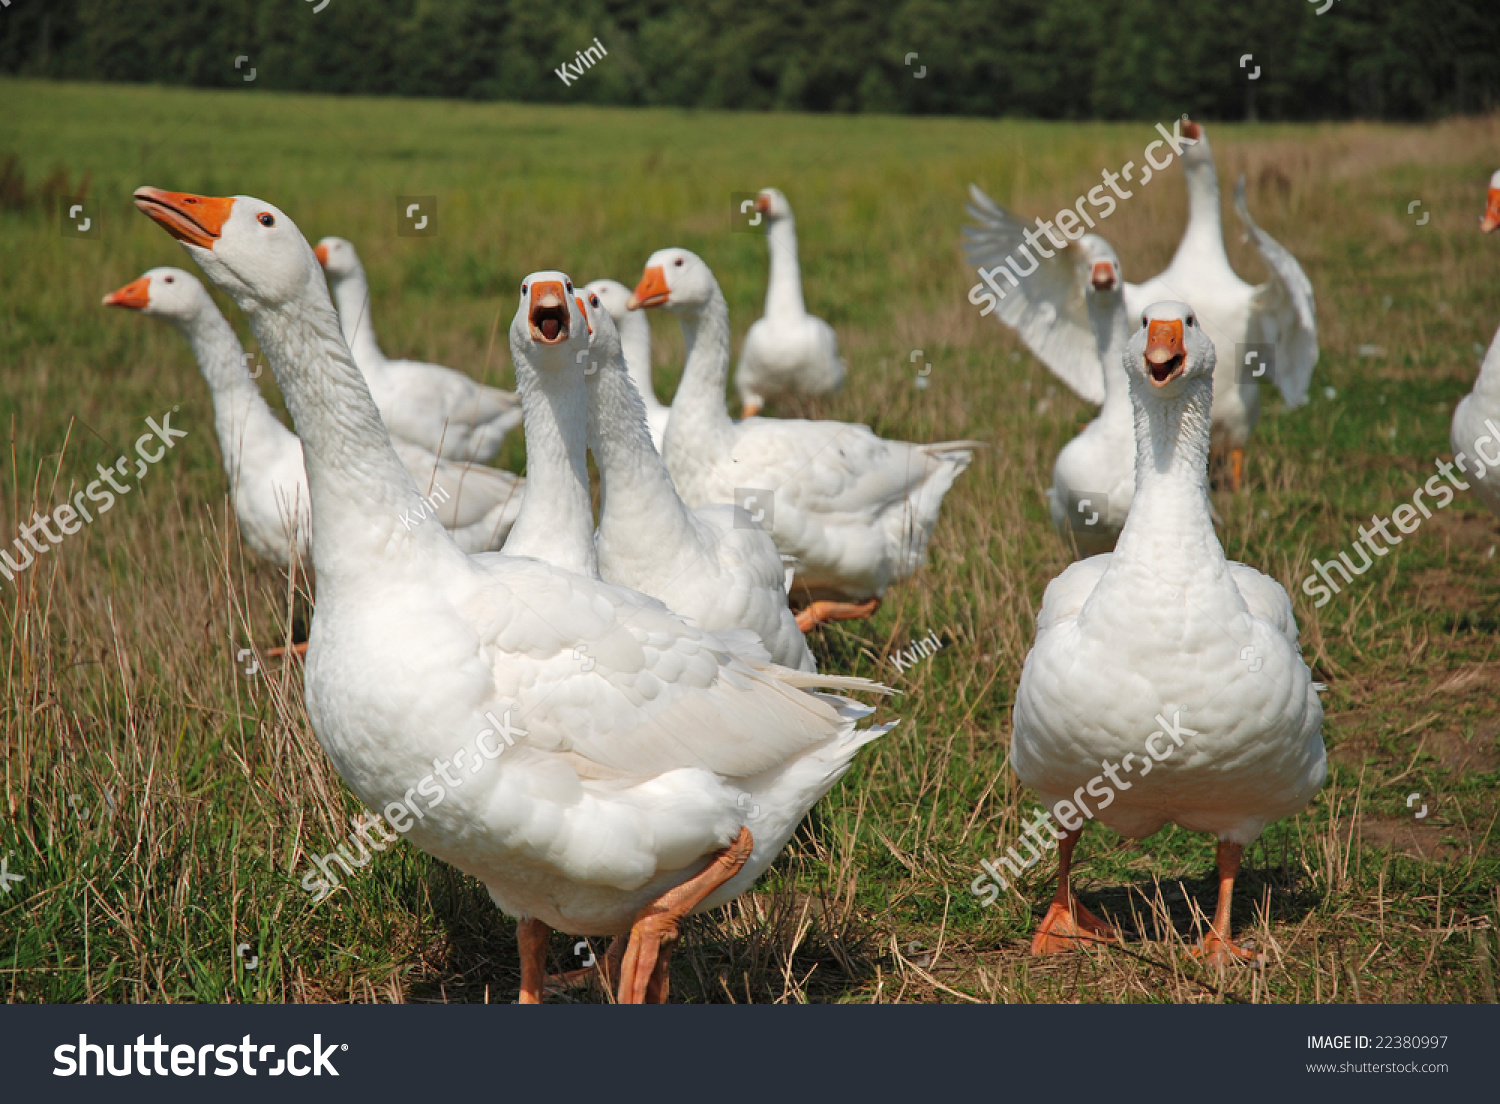 White Domestic Geese Team Stock Photo 22380997 : Shutterstock